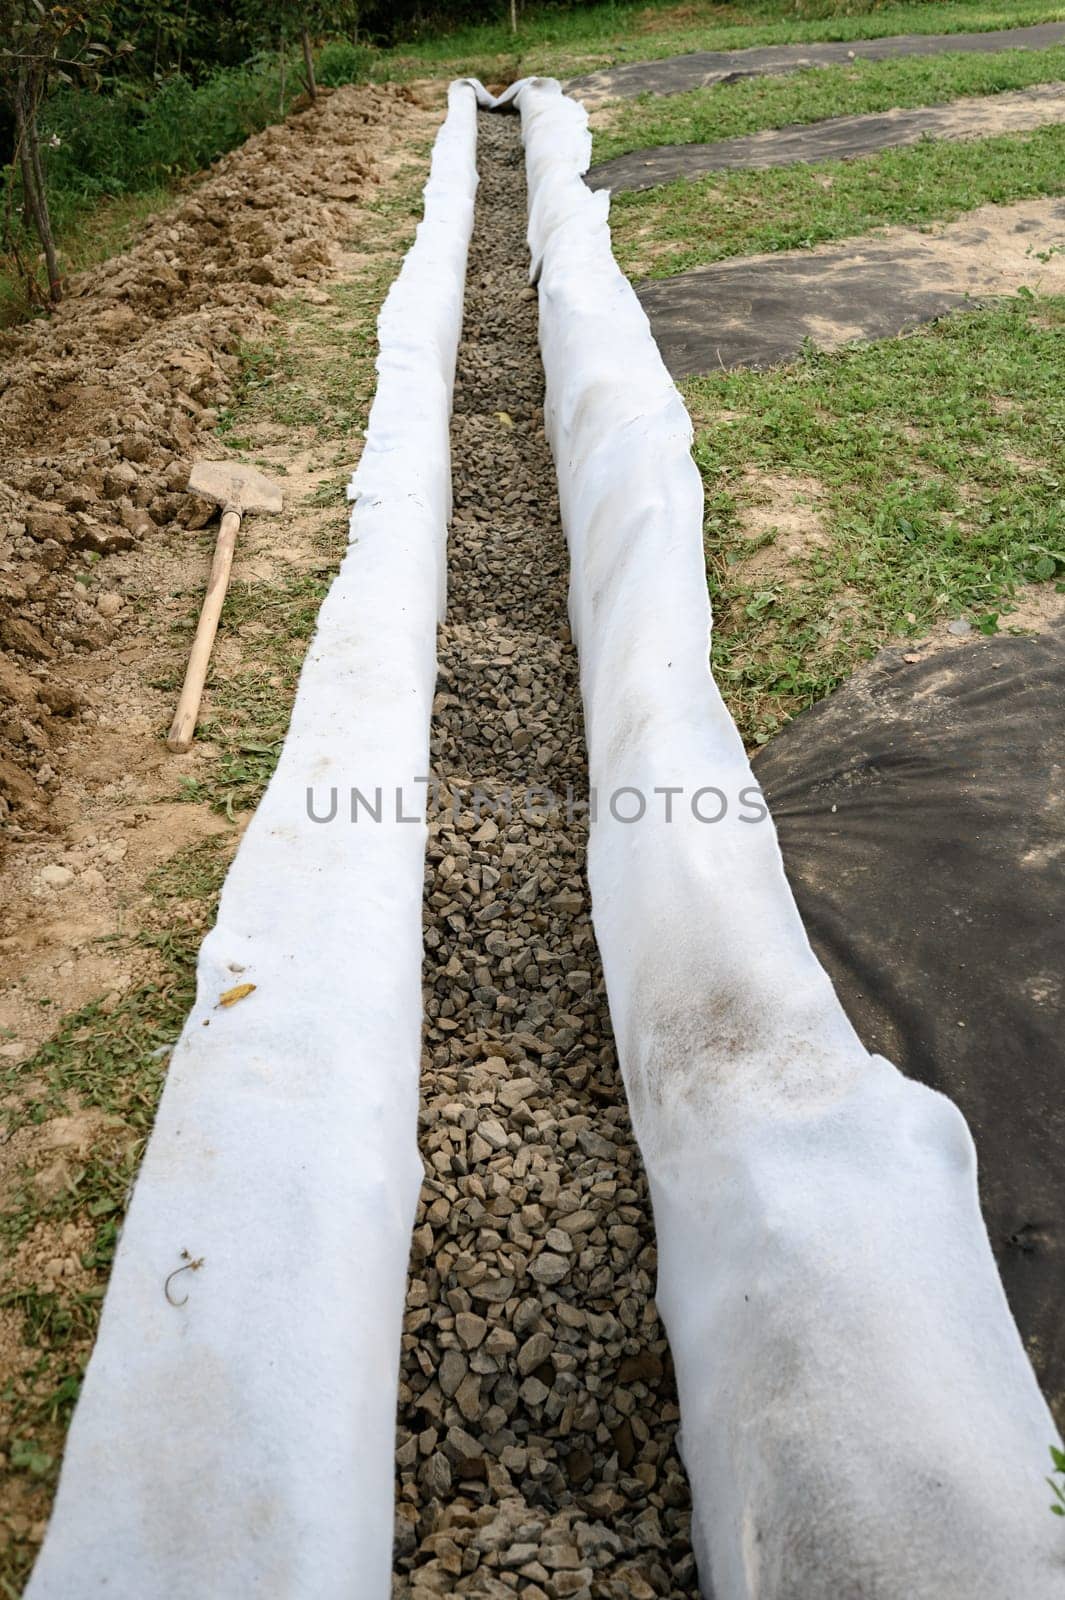 The drainage trench is covered with geotextile and filled with crushed stone to drain ground water from the site. by Niko_Cingaryuk